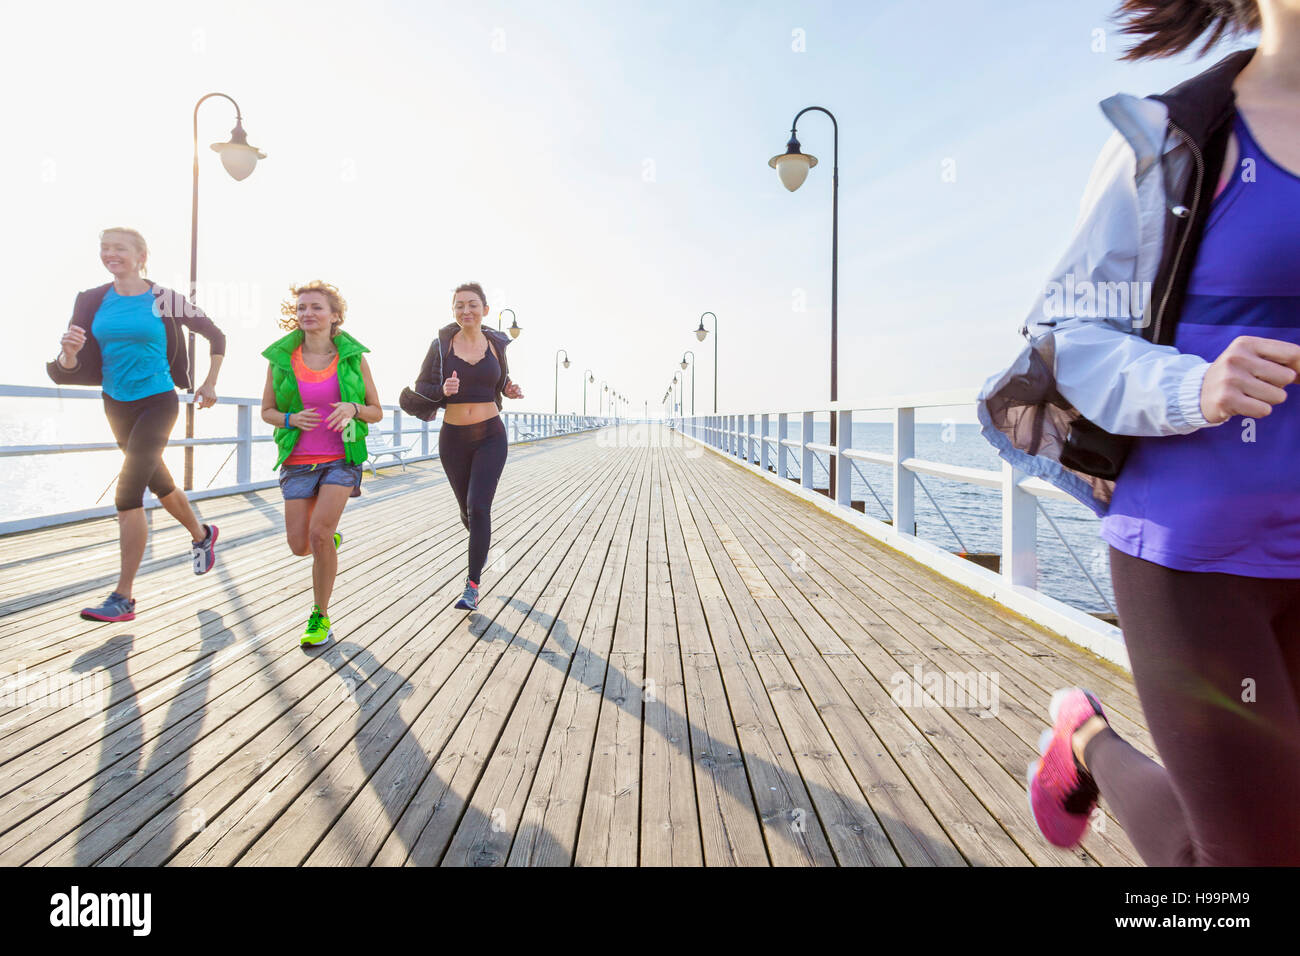 Group of women in sports clothing running on jetty Stock Photo